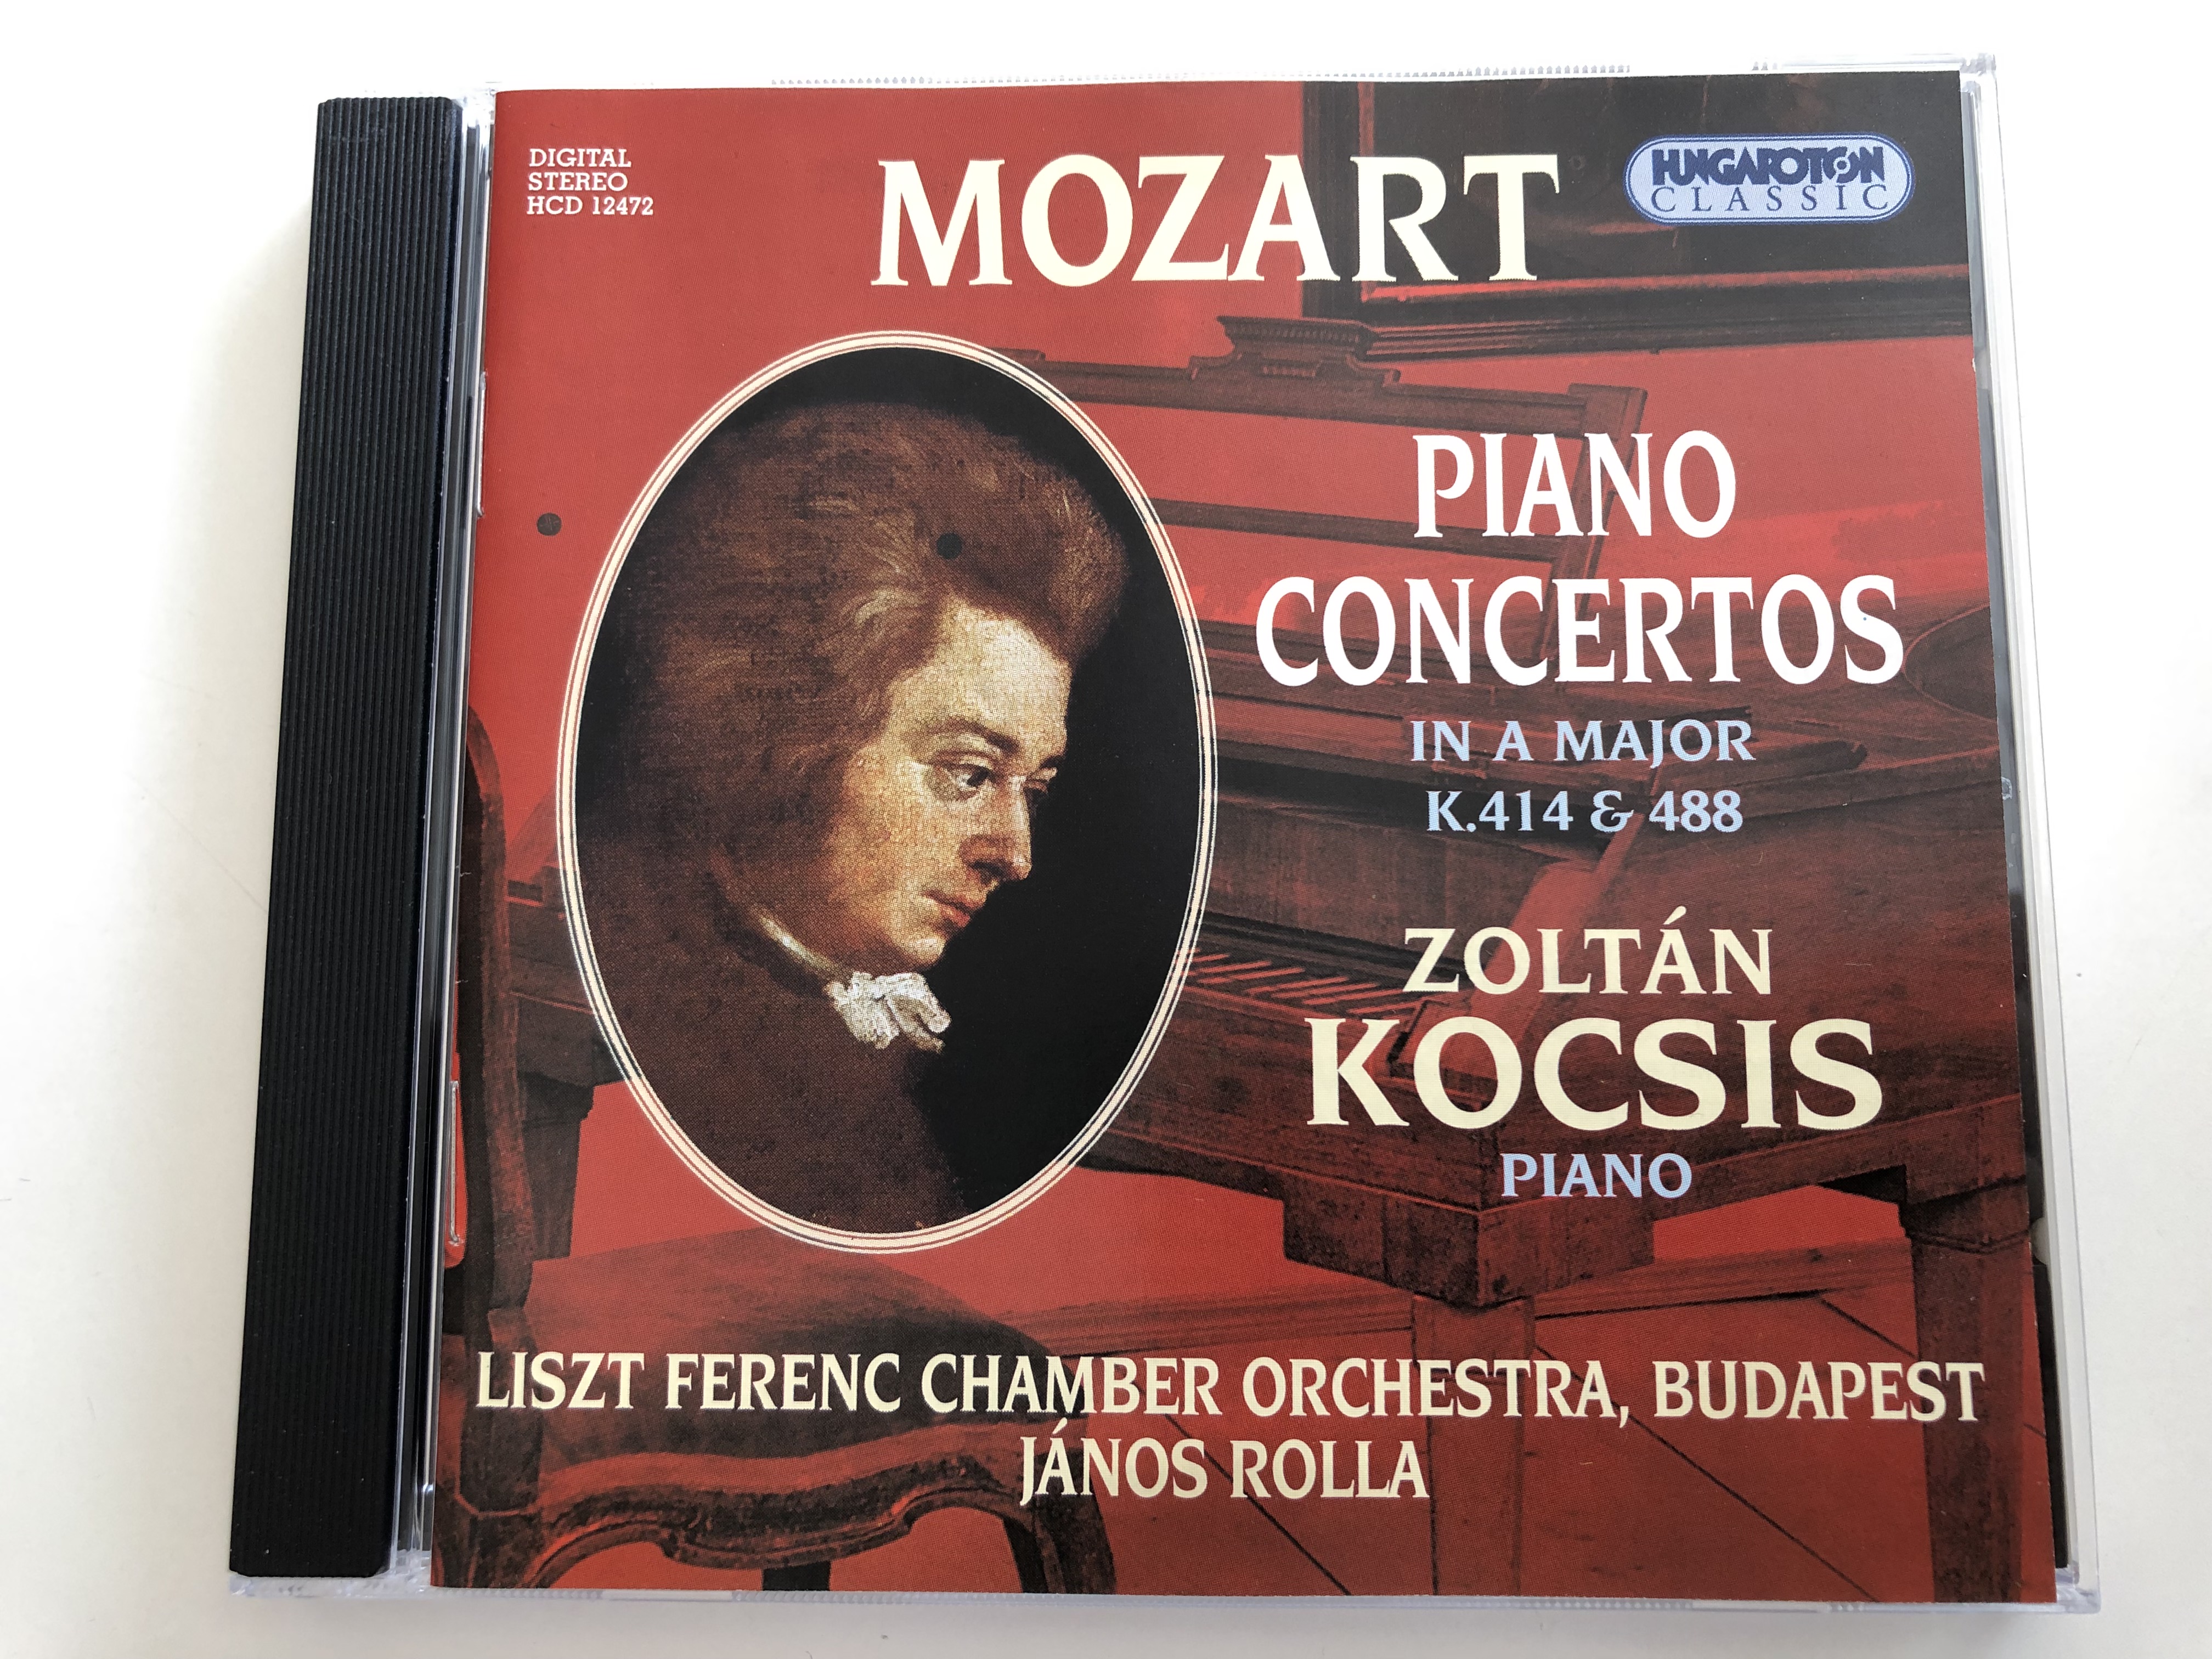 -mozart-piano-concertos-in-a-major-k.414-488-zolt-n-kocsis-piano-liszt-ferenc-chamber-orchestra-budapest-conducted-by-j-nos-rolla-hungaroton-classic-audio-cd-2000-hcd-12472-1-.jpg